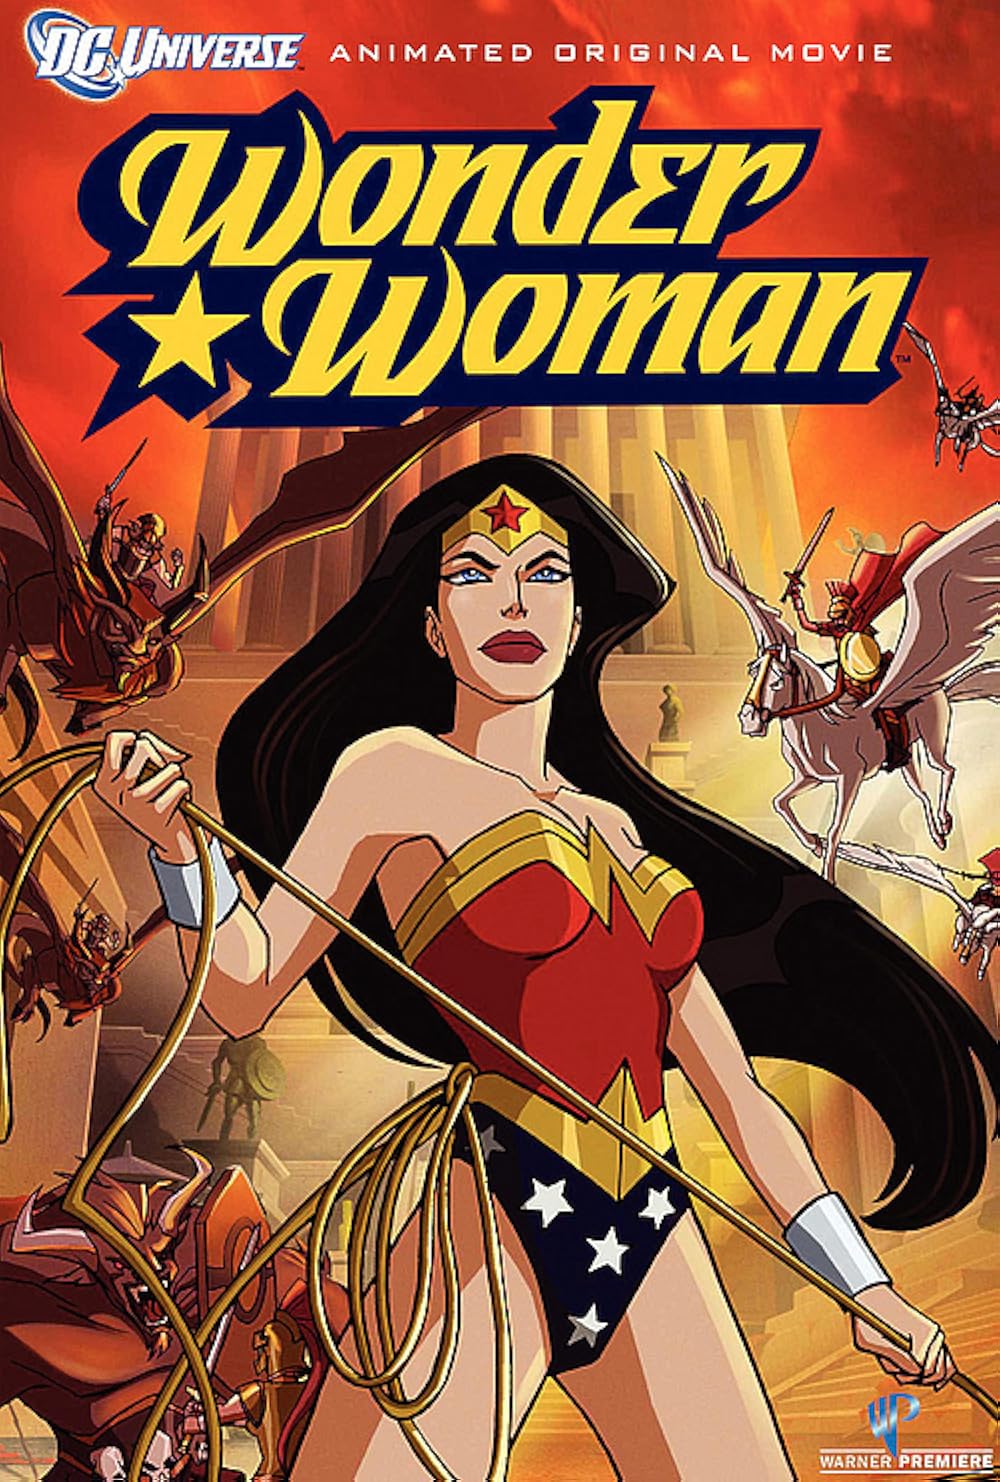 alan scholes recommends watch wonder woman full movie online pic